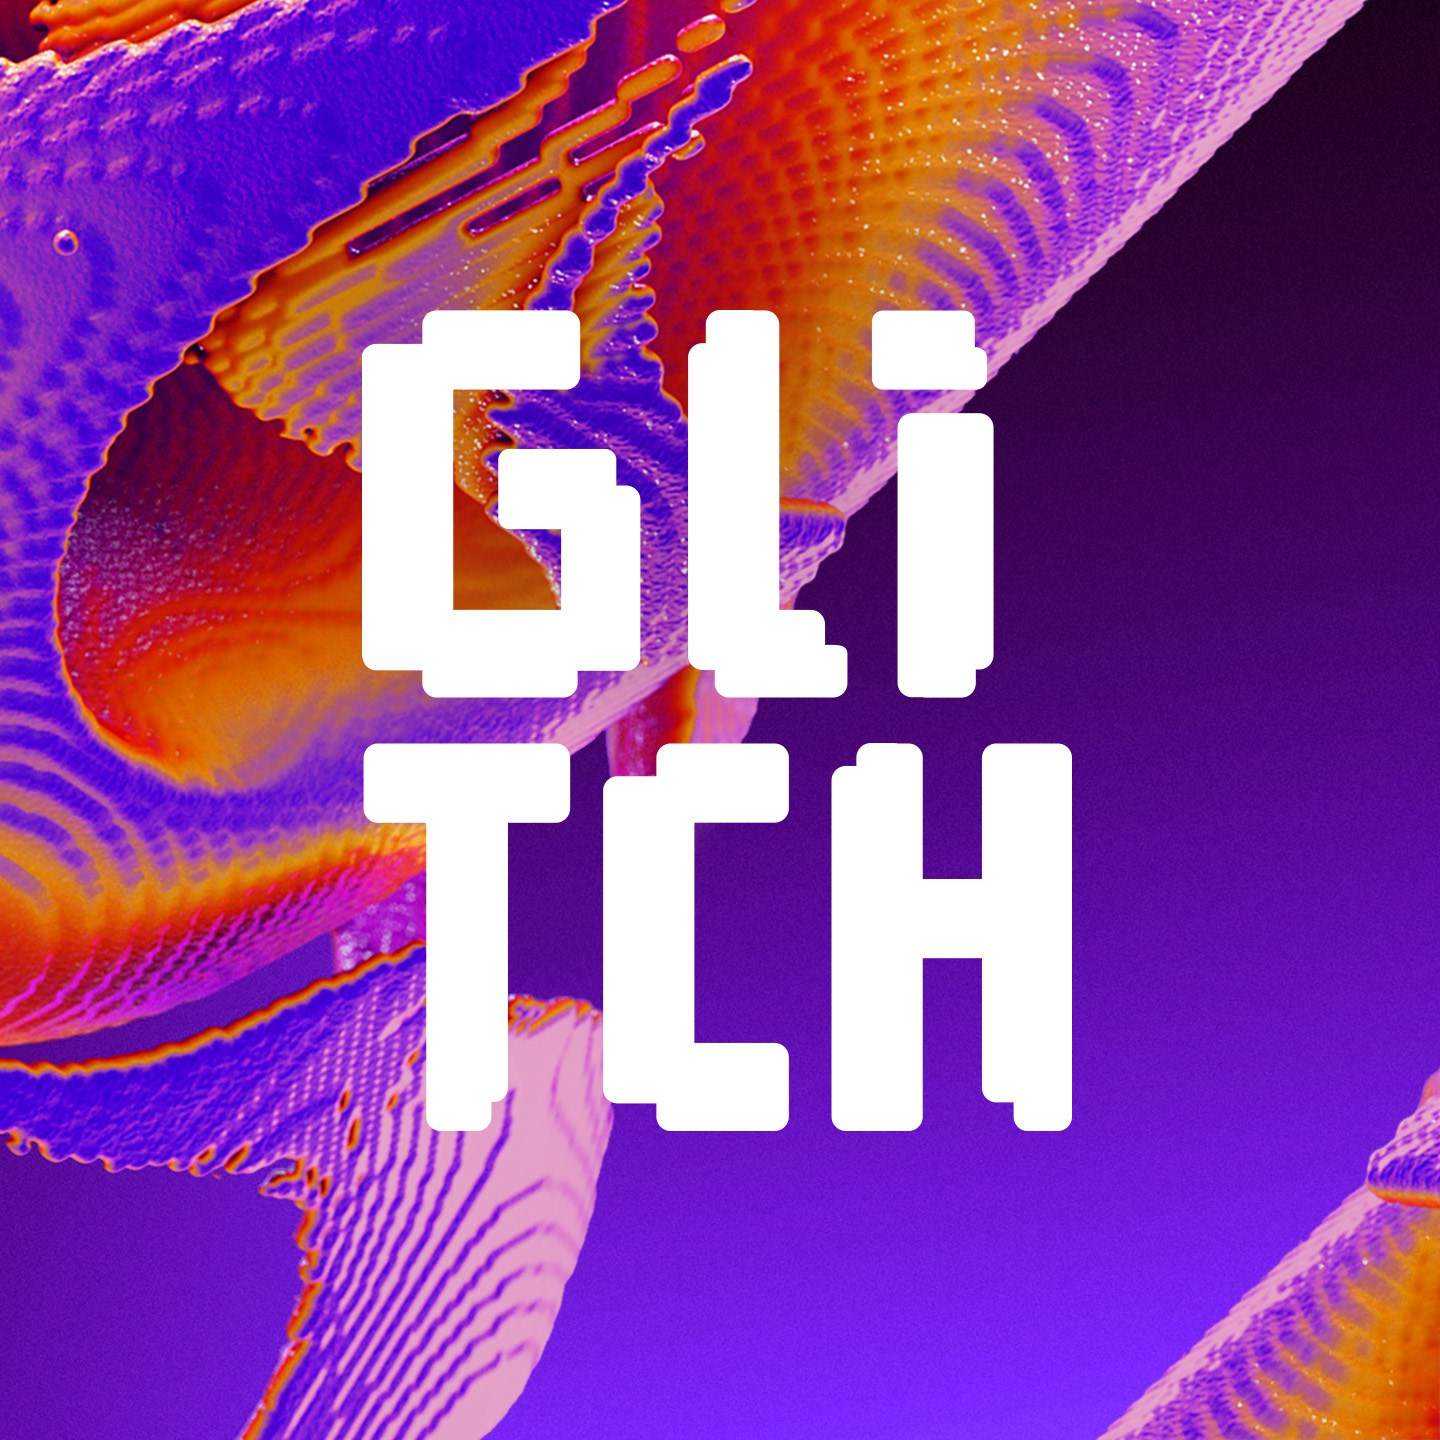 5 Artists Who Are Masters of Glitch Music